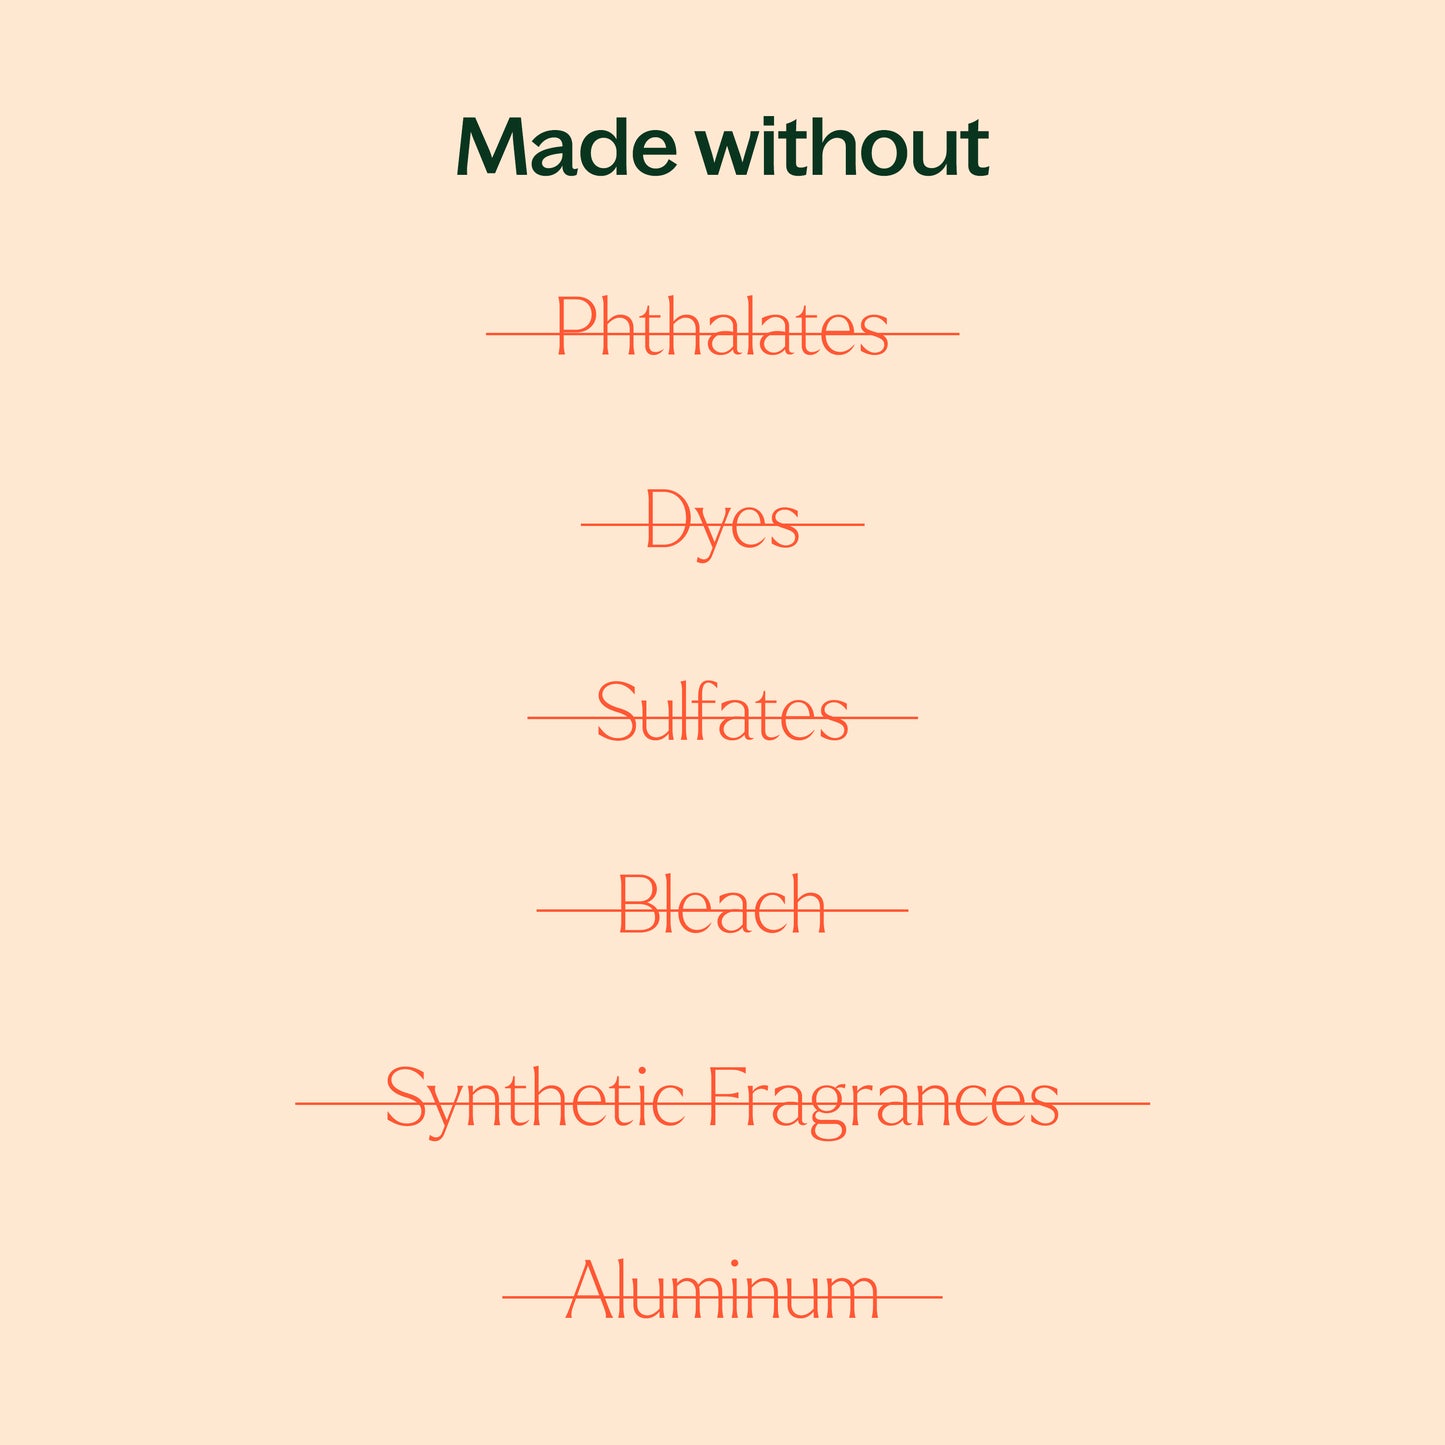 made without phthalates, dyes, sulfates, bleach, synthetic fragrances, aluminum